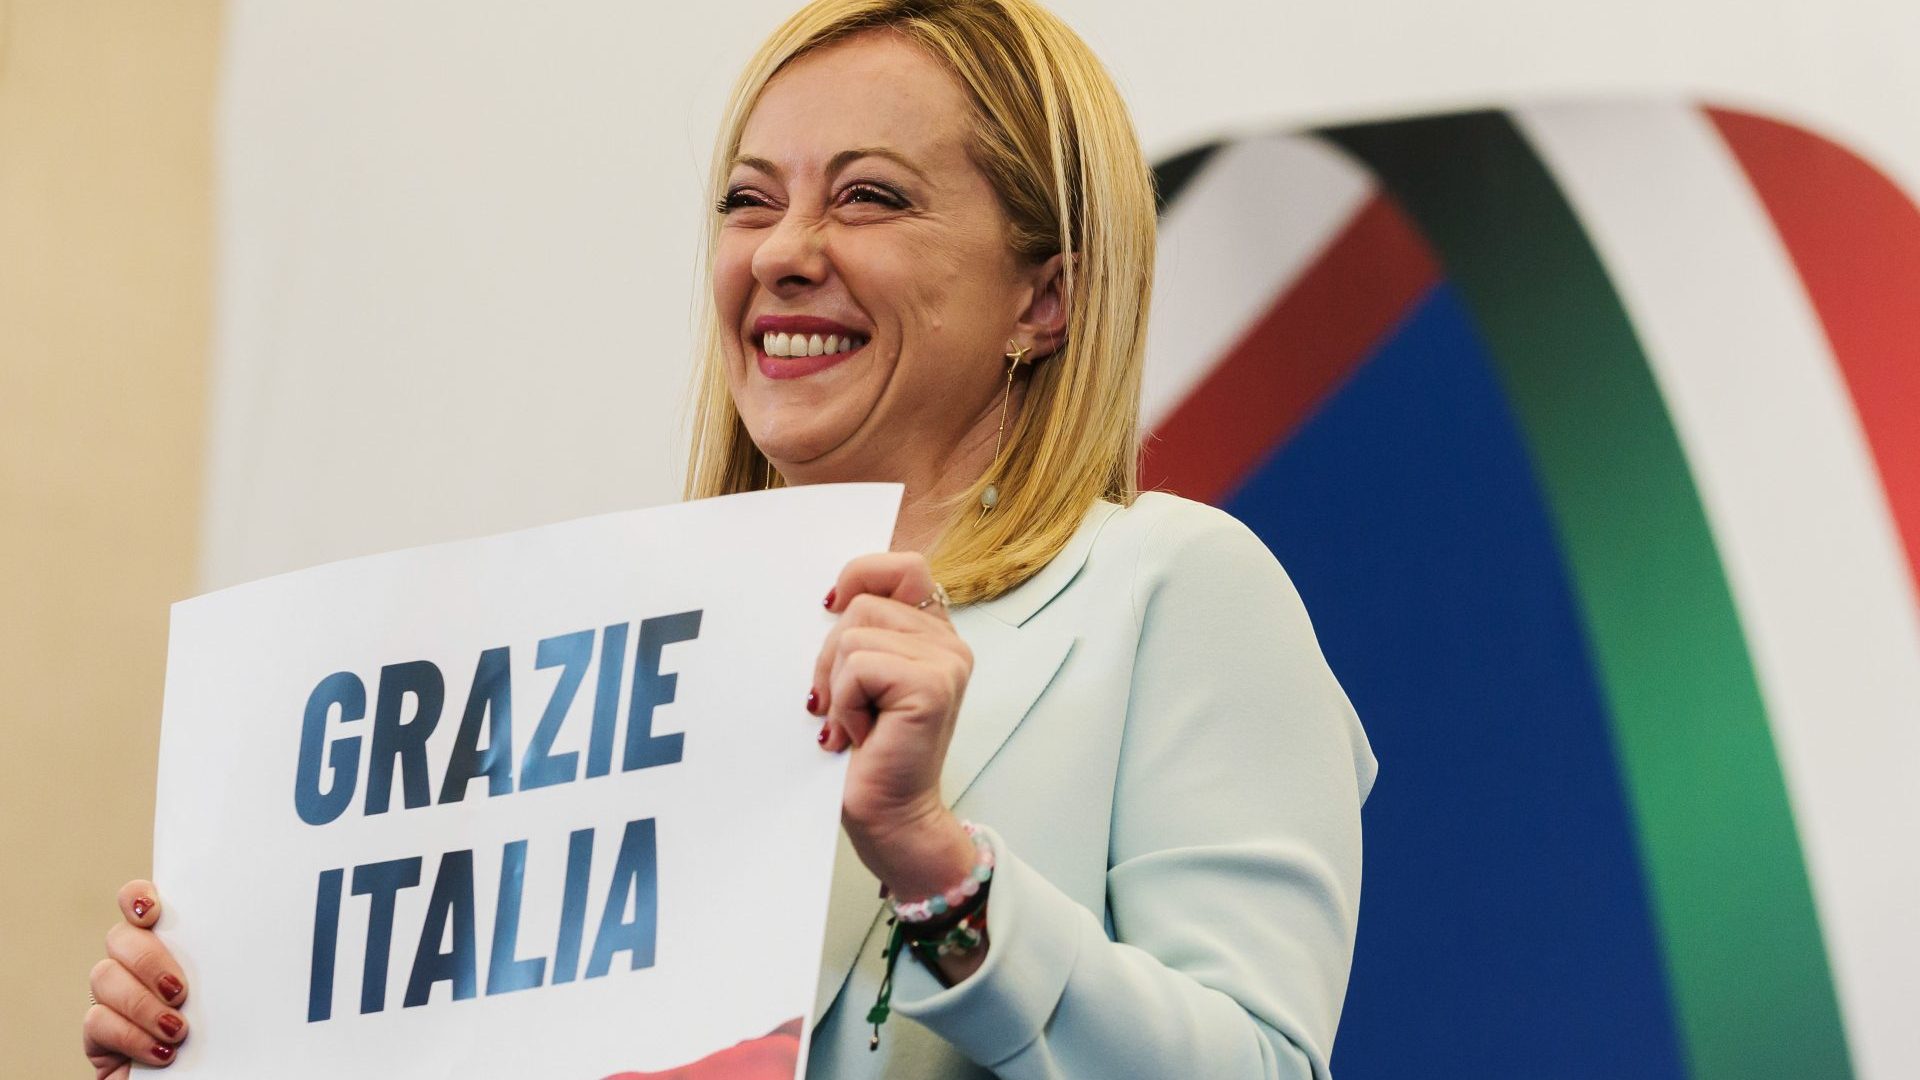 Giorgia Meloni is seen holding a placard quoting "Thanks Italy" in the press room. Photo: Valeria Ferraro/SOPA Images/LightRocket via Getty Images